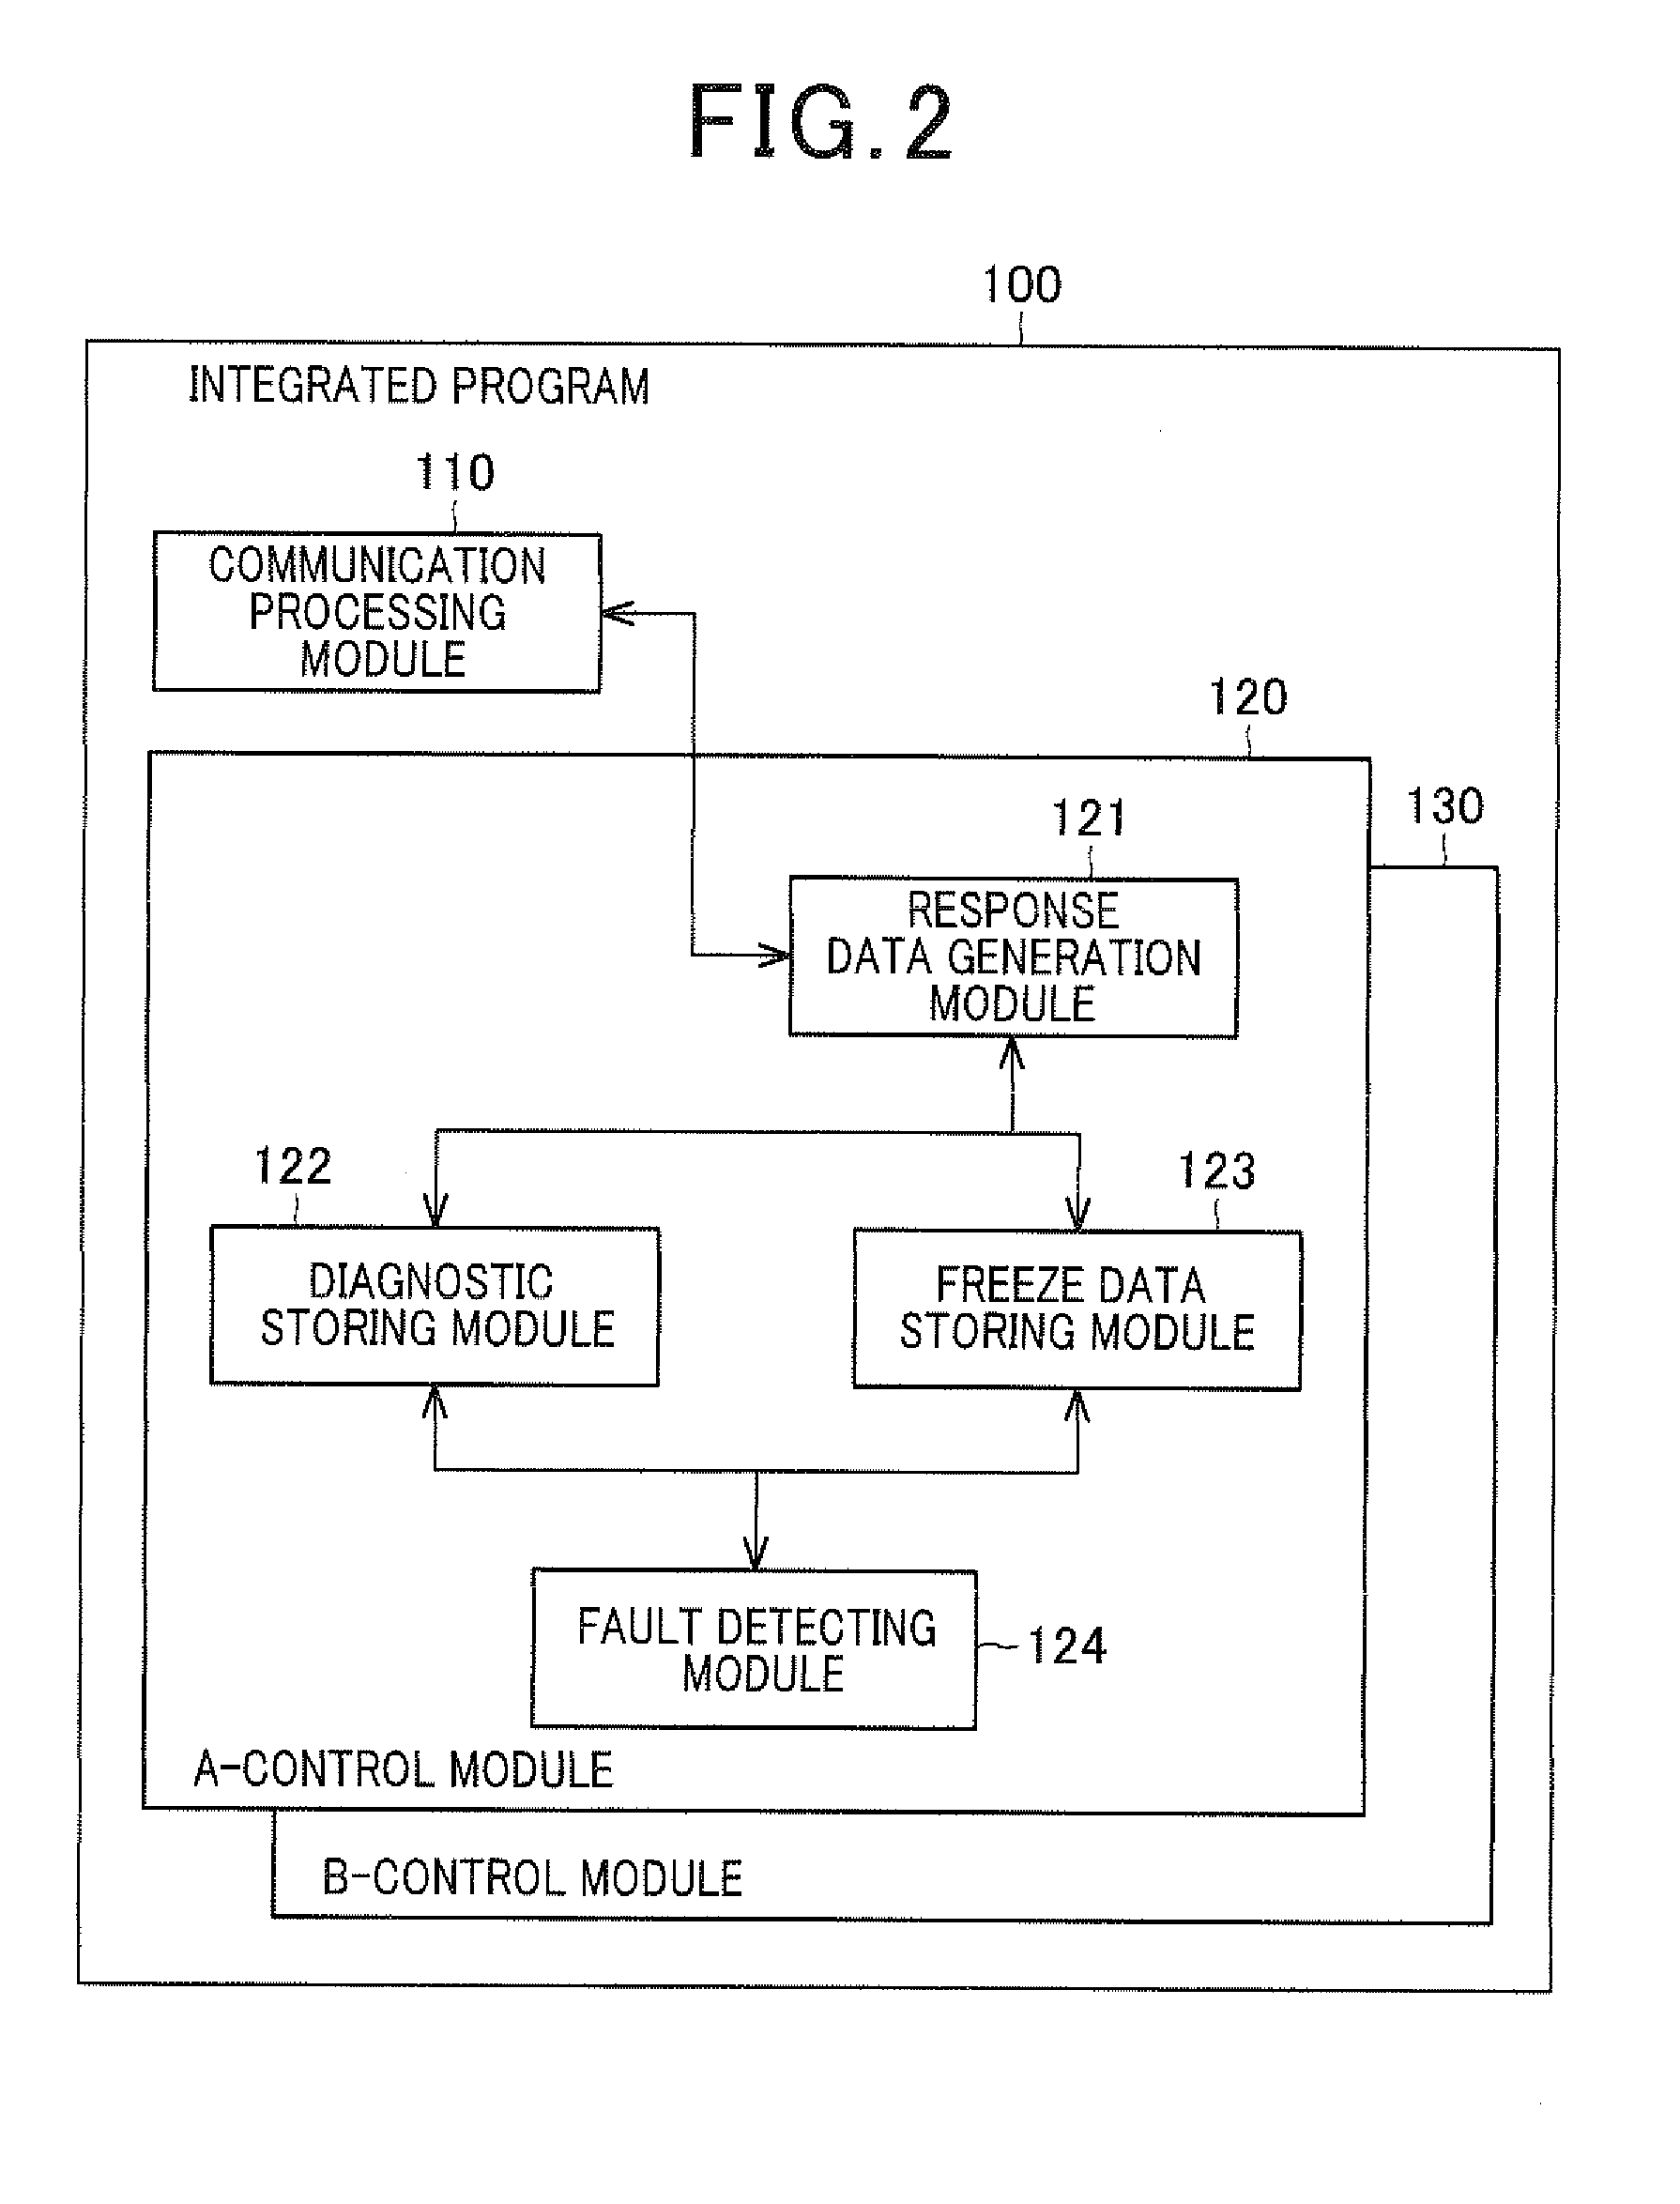 Vehicle test system including plurality of apparatuses mutually communicable via network